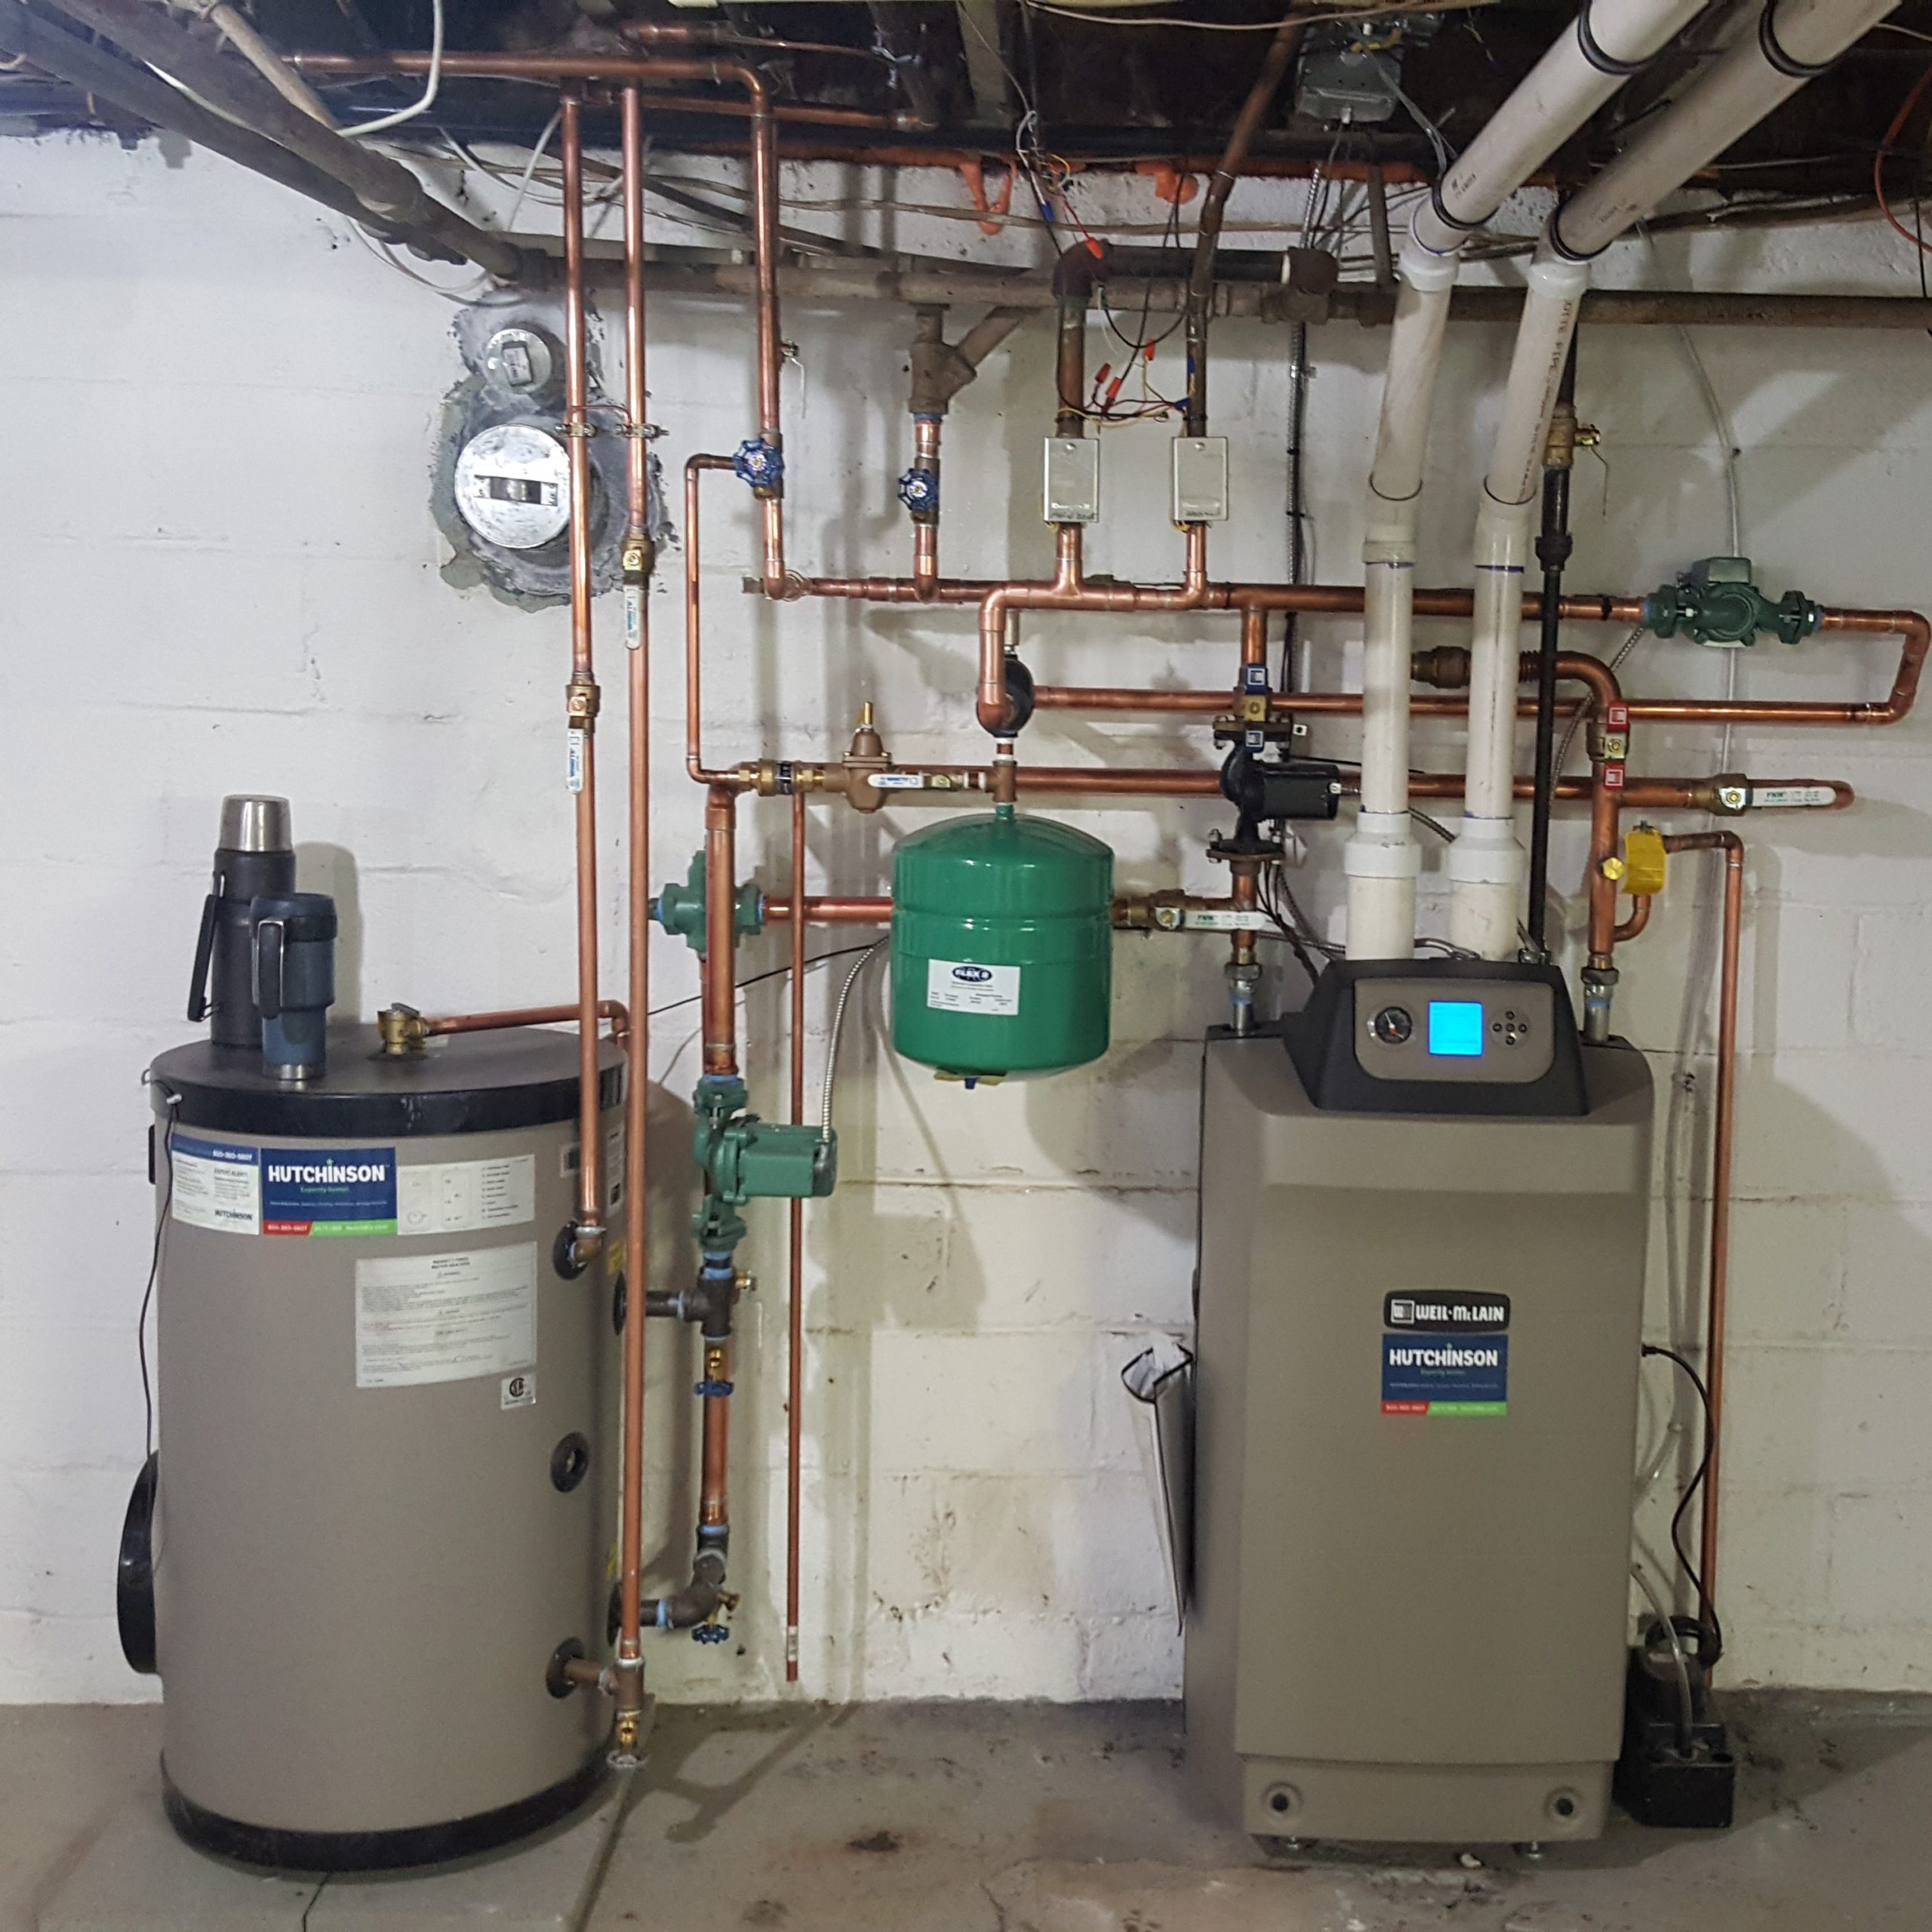 Plumbing, Heating and Air Conditioning Services in Hammonton, NJ